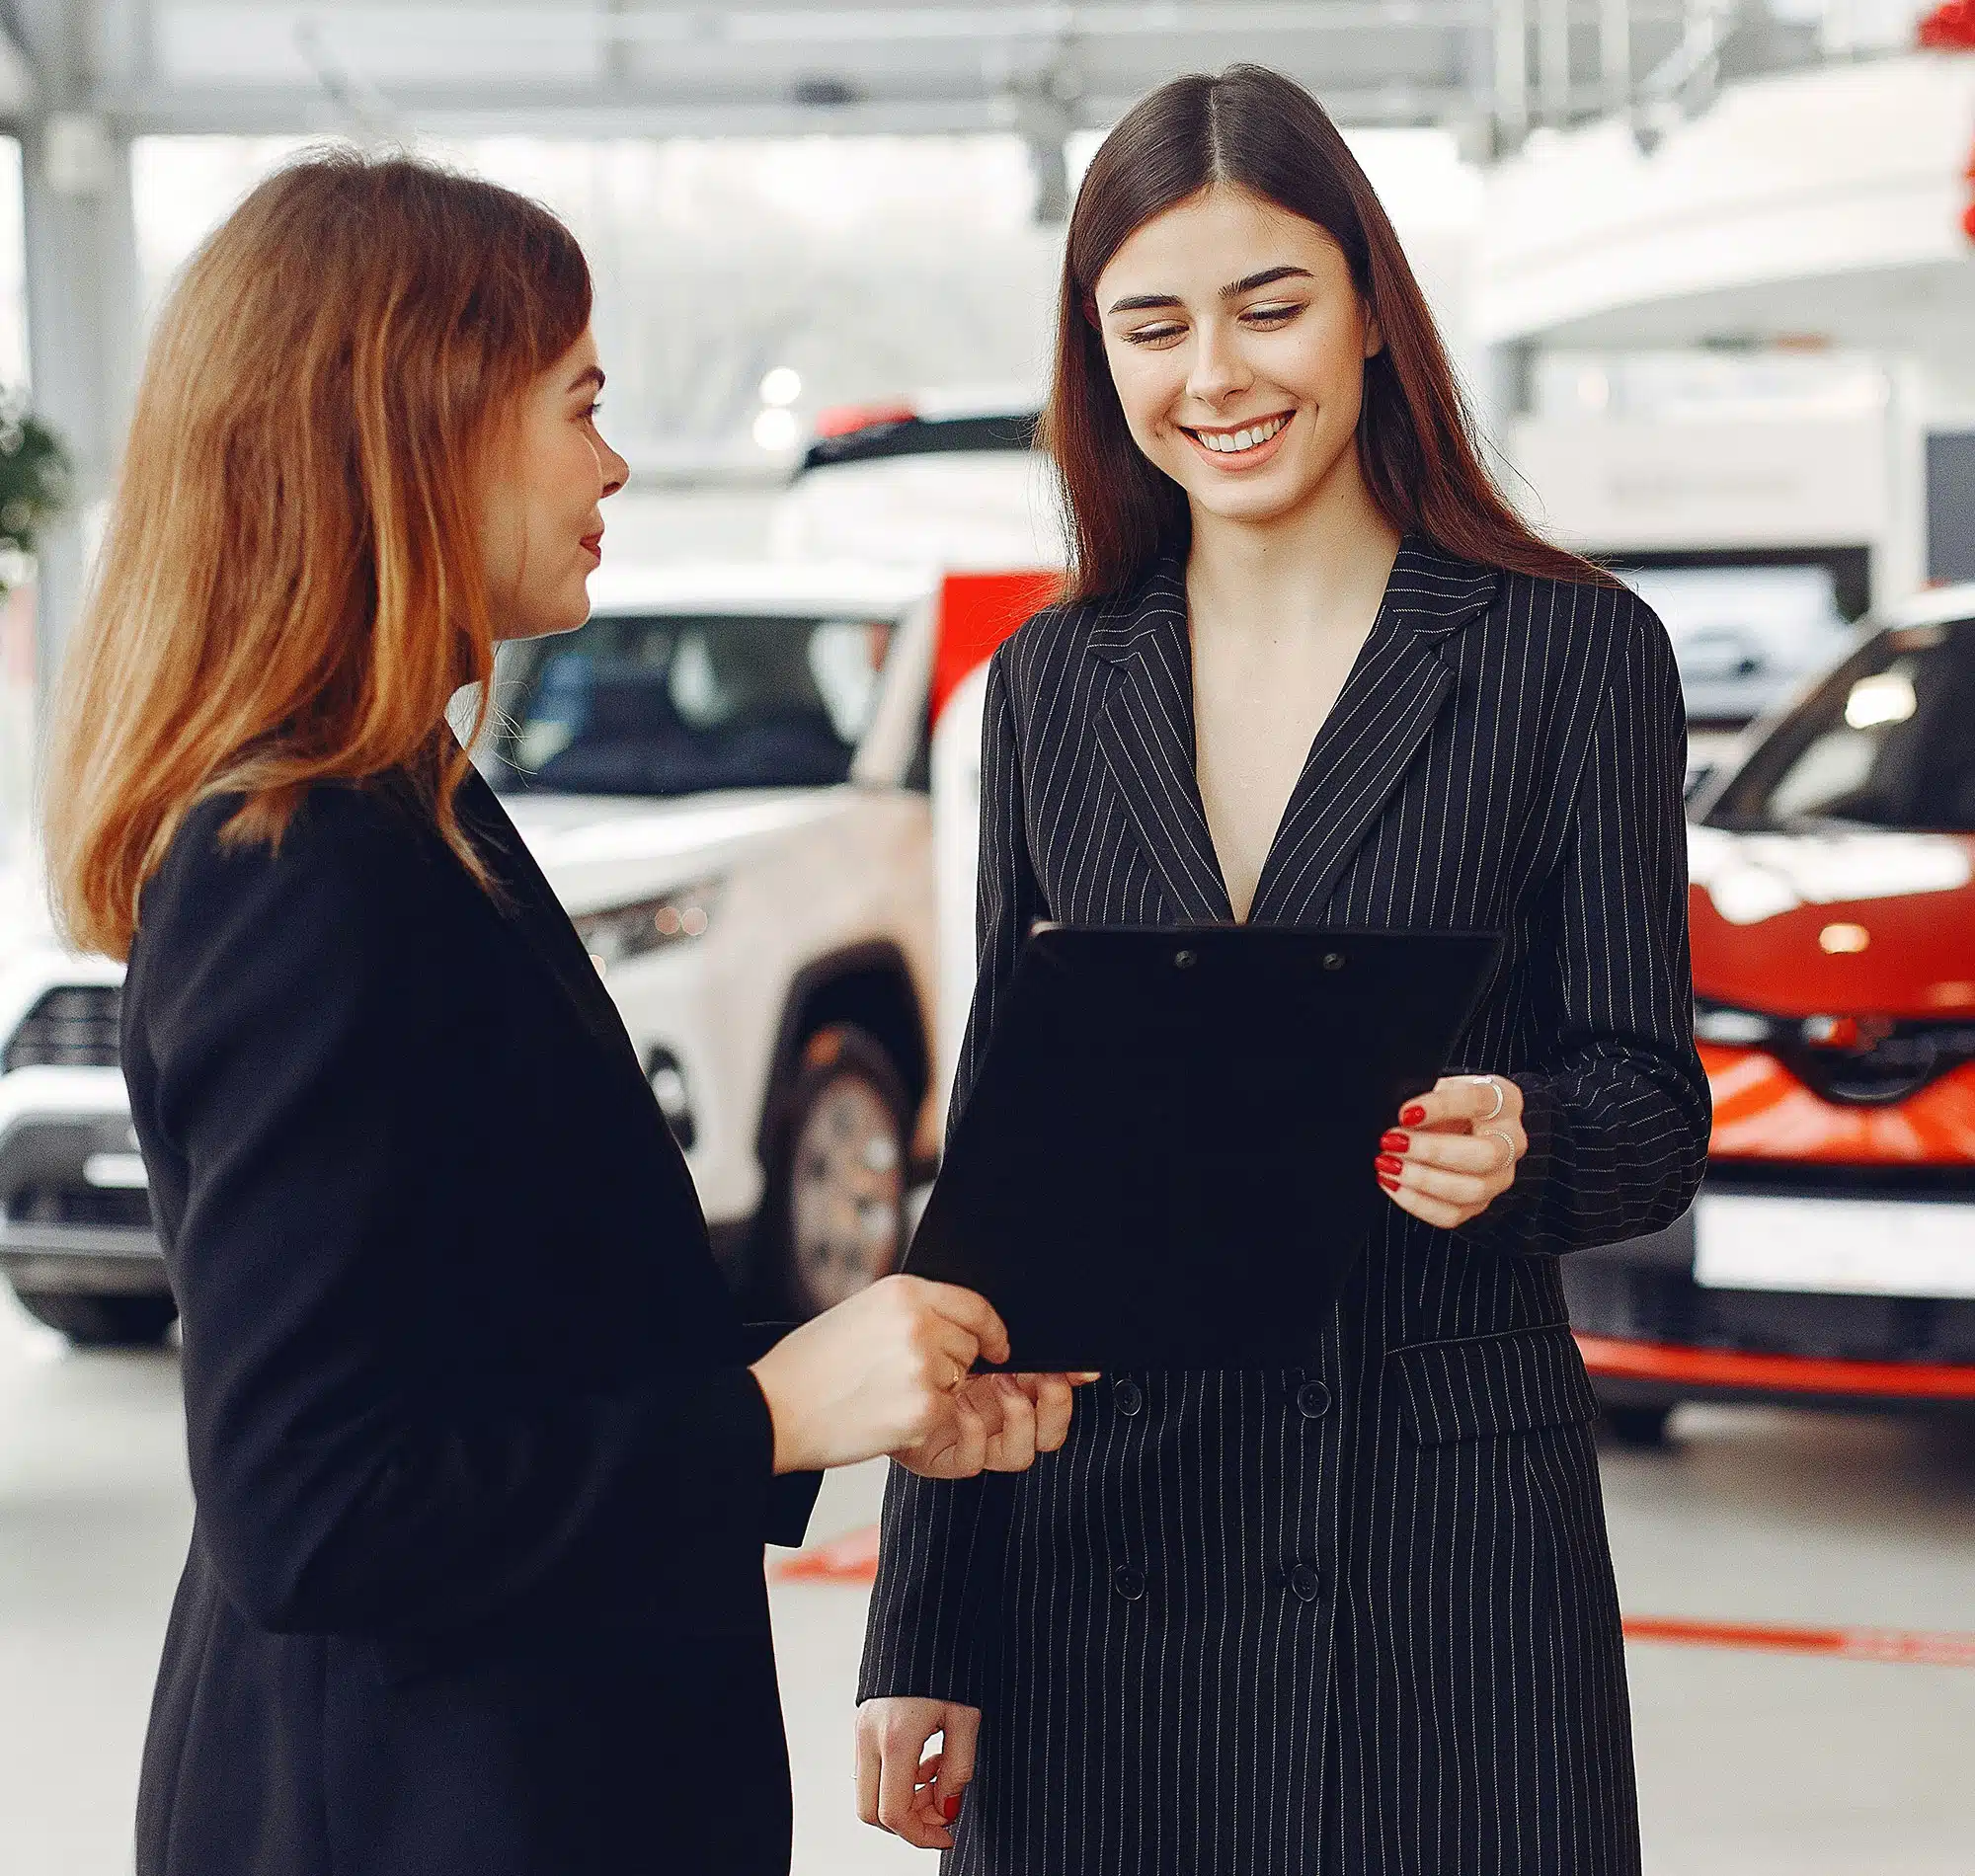 Two women smiling while reading documents at a car dealership.